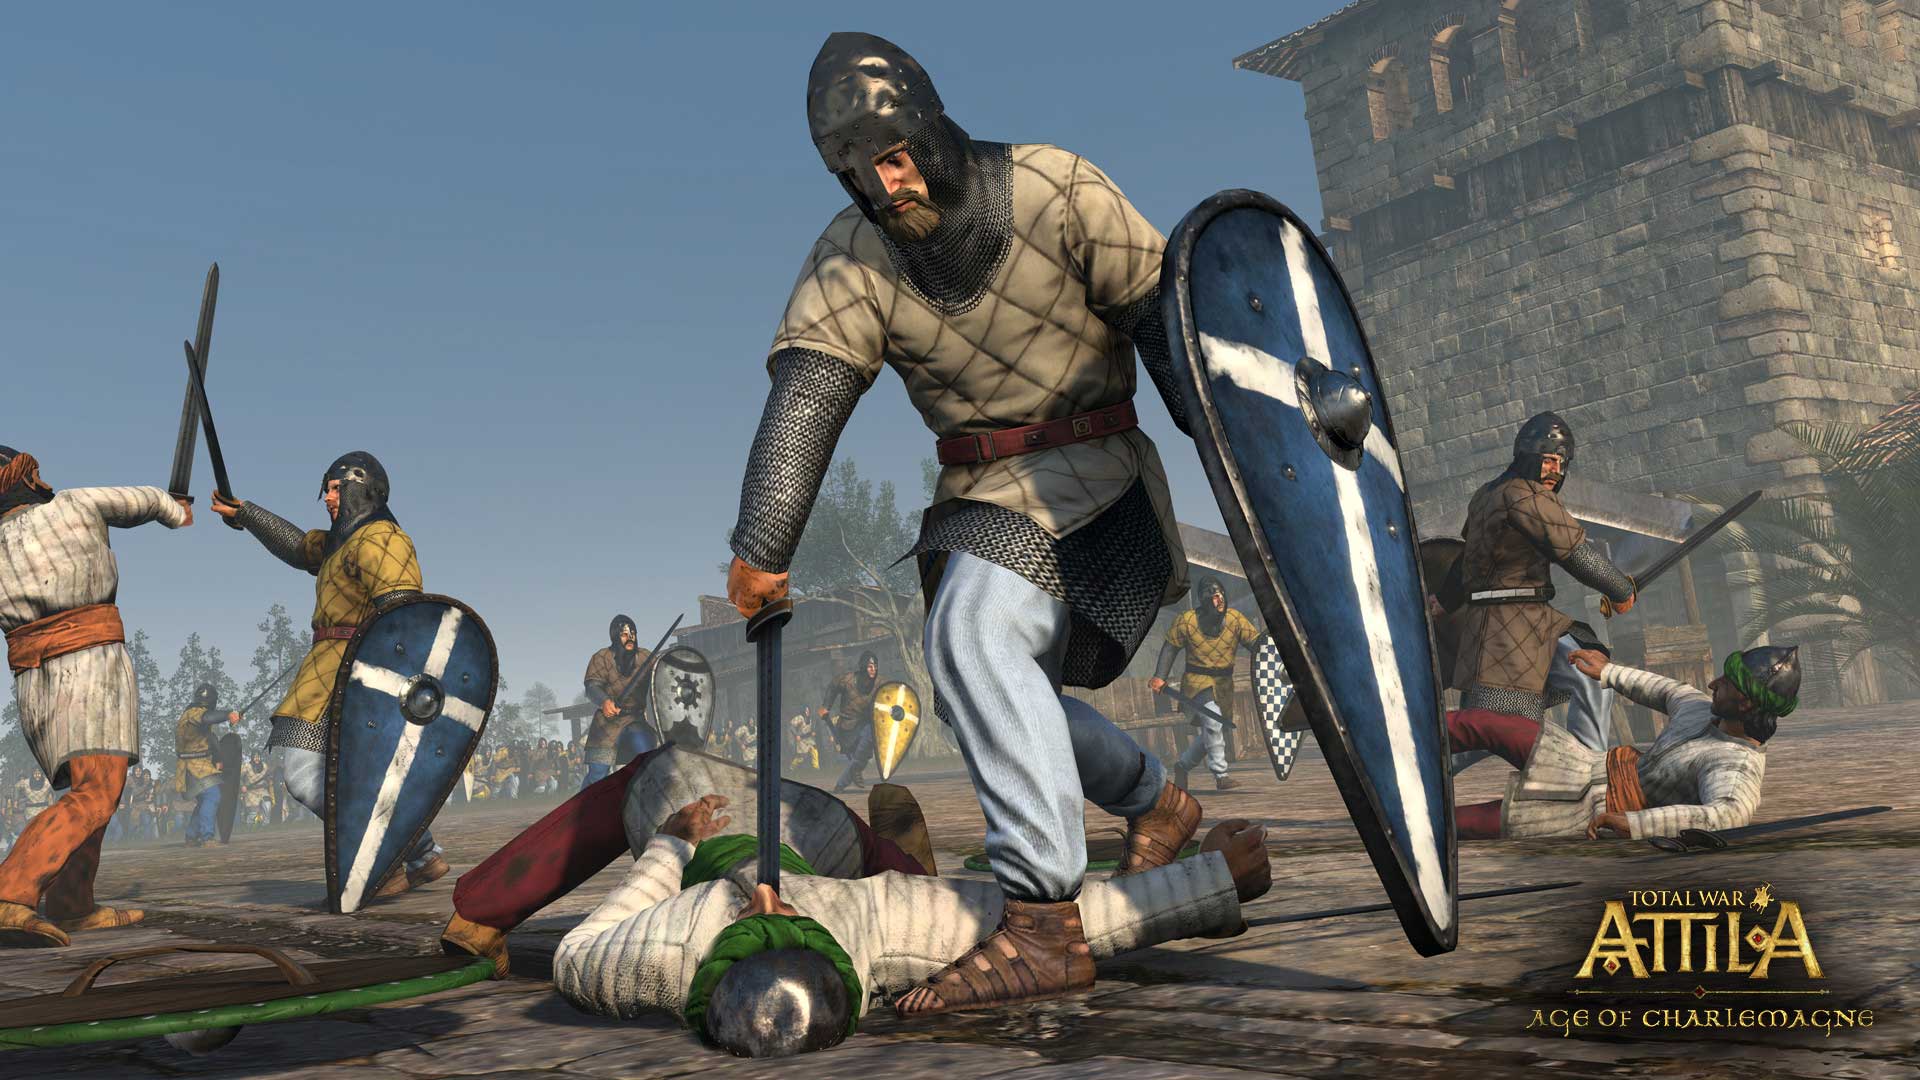 The Age of Charlemagne Campaign Pack out now for Total War: Attila | VG247